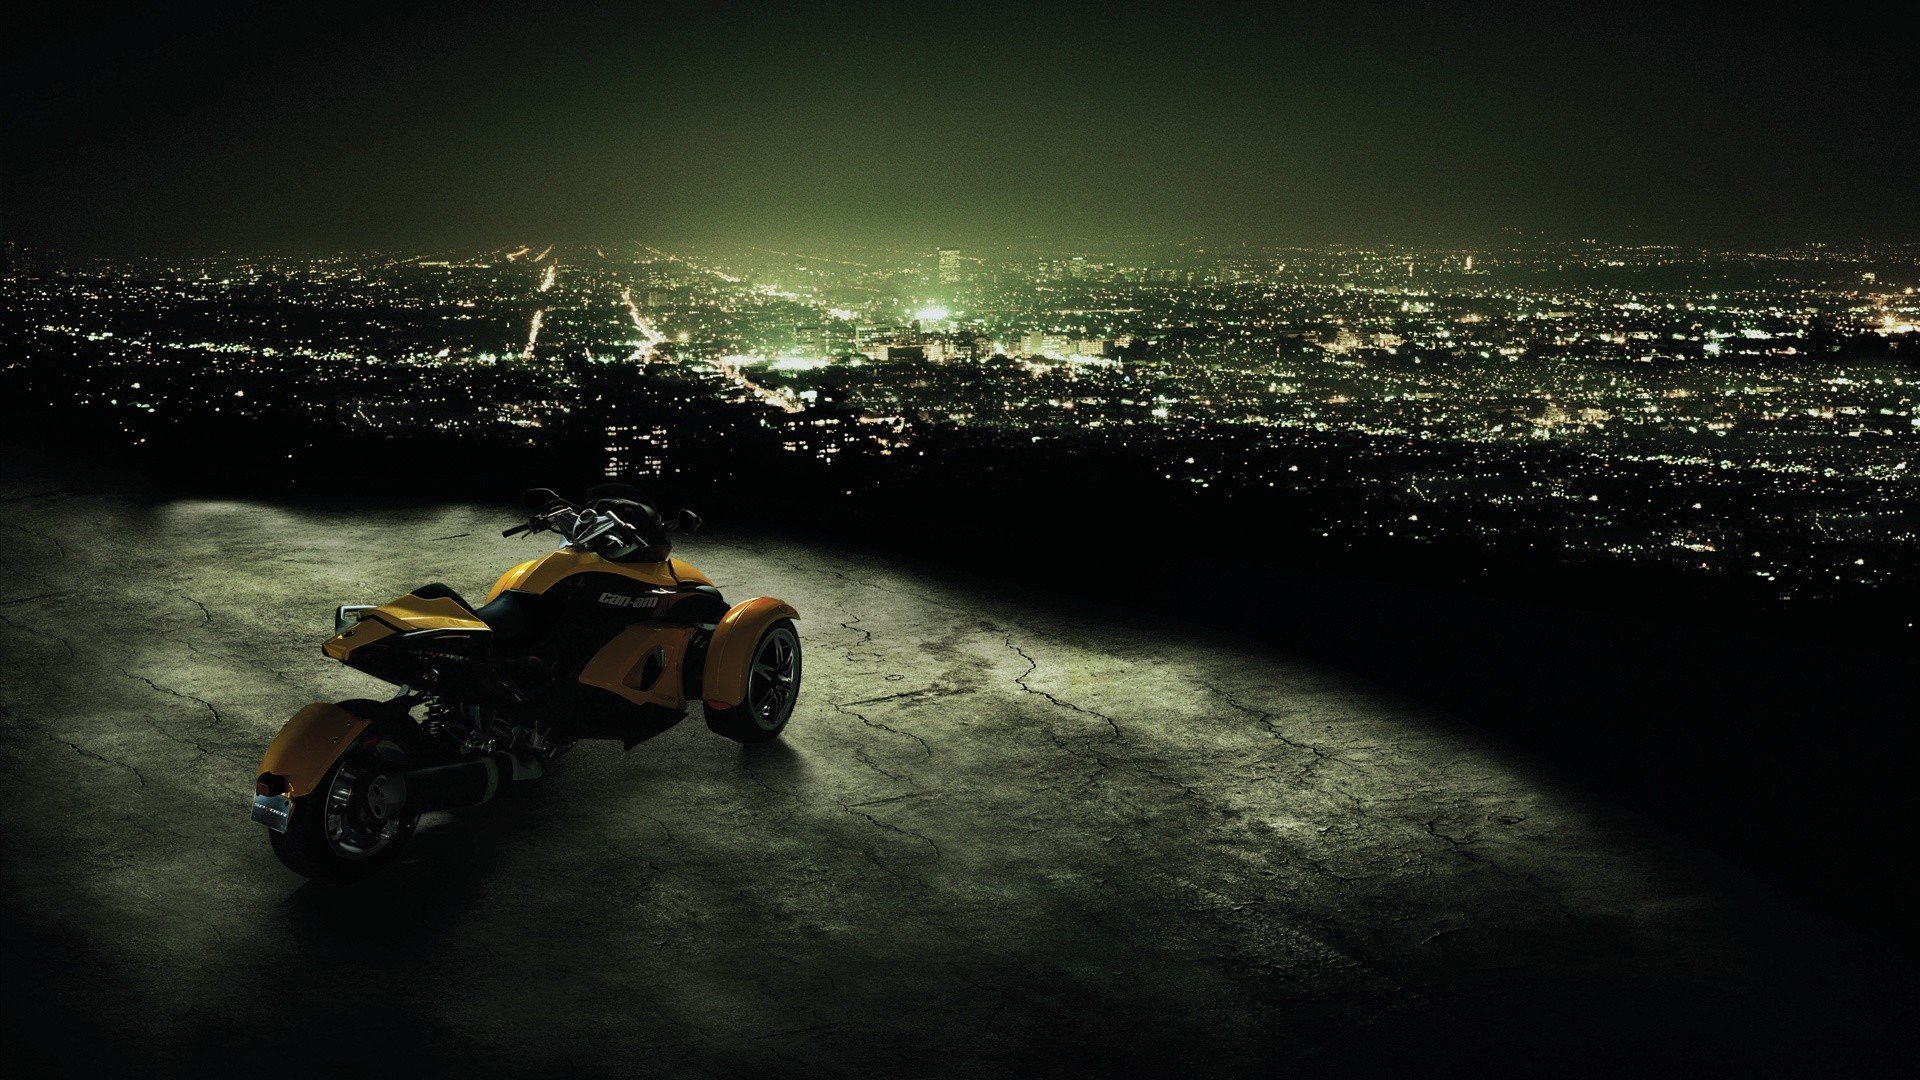 cityscapes, Motorbikes, Can am, Spyder Wallpaper